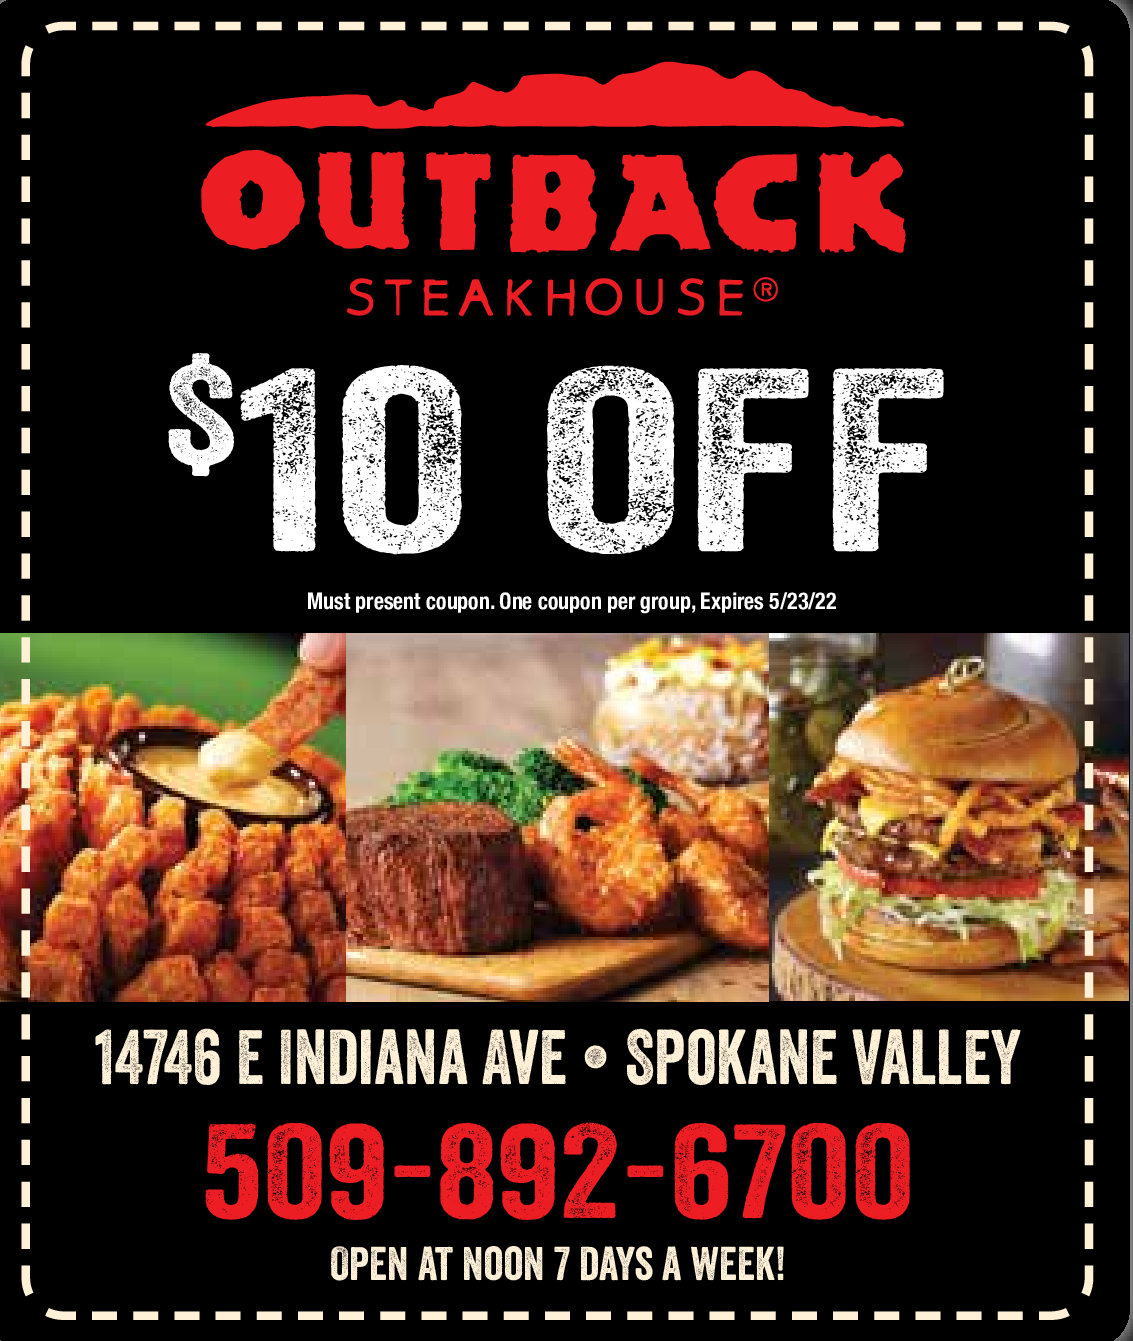 Outback Steakhouse Spokane Valley Mall Coupons